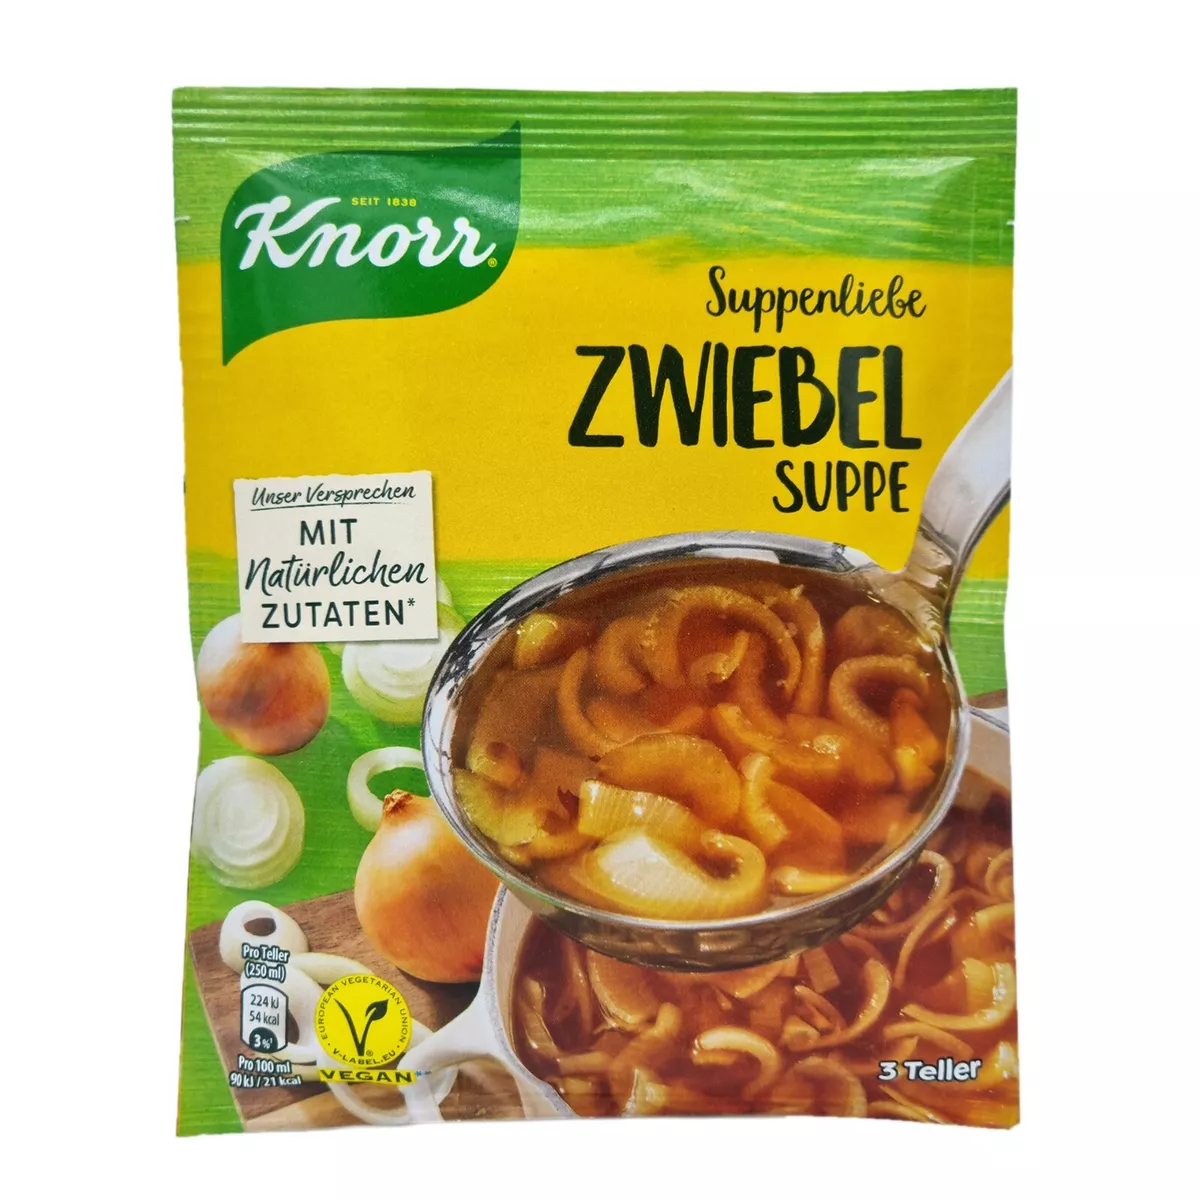 8x Knorr Suppenliebe ✈TRACKED SHIPPING soup 🍲 eBay | Zwiebel Suppe onion